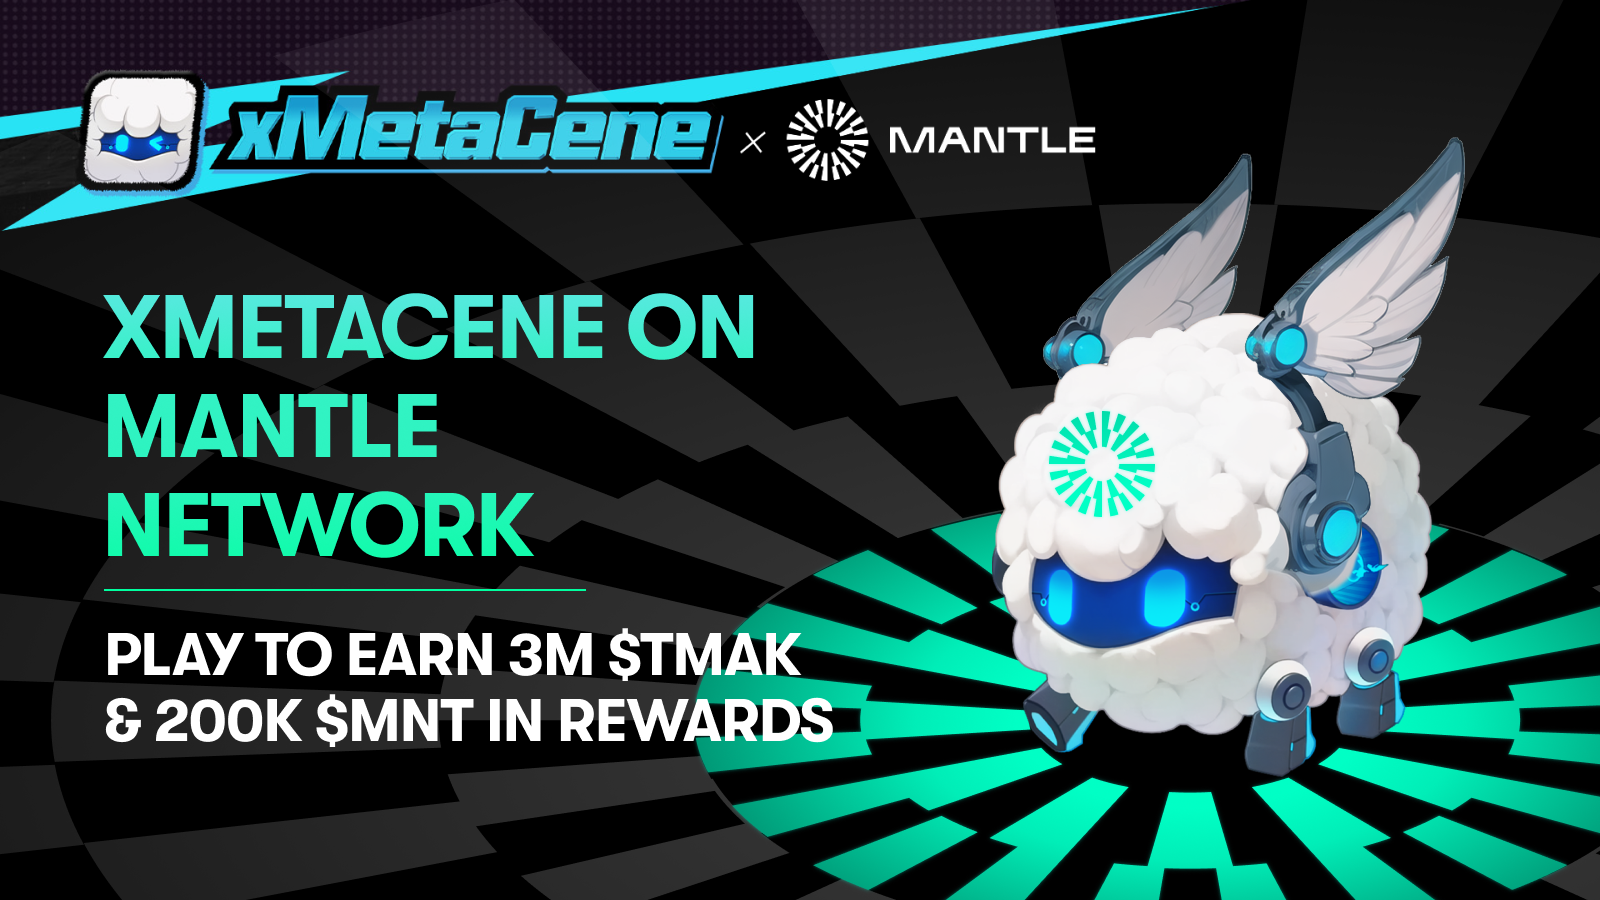 Play xMetaCene on Mantle Network and Earn 3M $TMAK and 200K $MNT in Rewards!